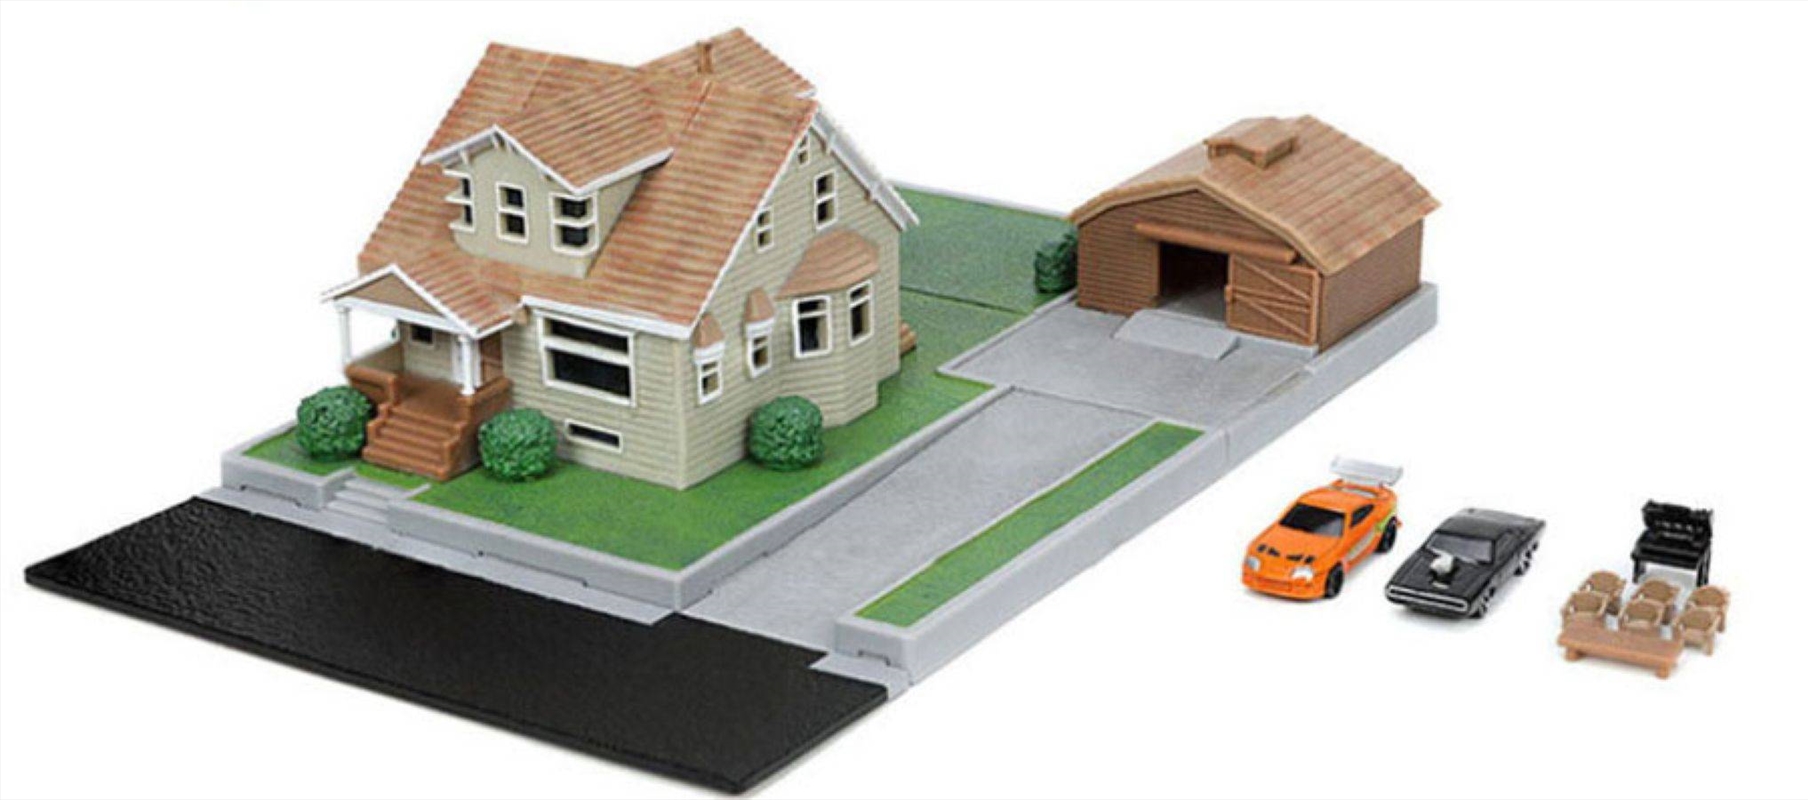 Fast and Furious - Dom's House NanoScene with 2 Vehicles/Product Detail/Figurines